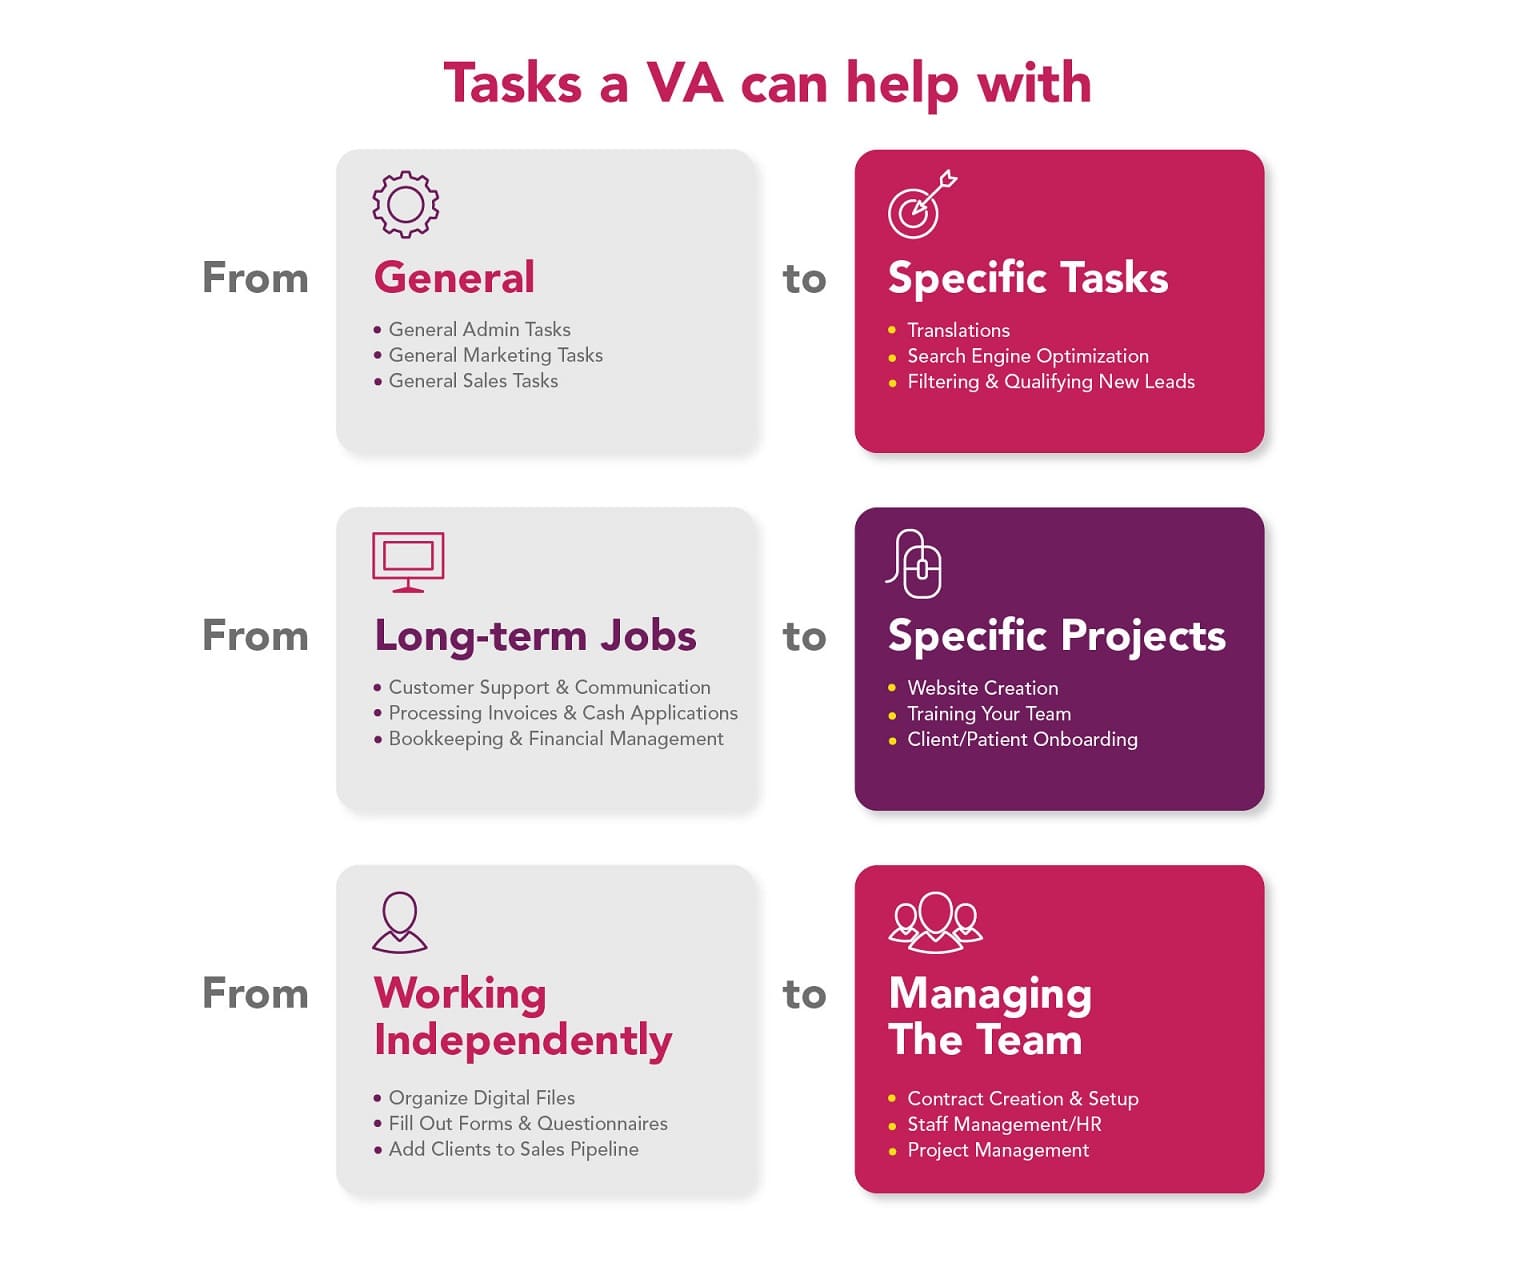 Tasks a VA can help with